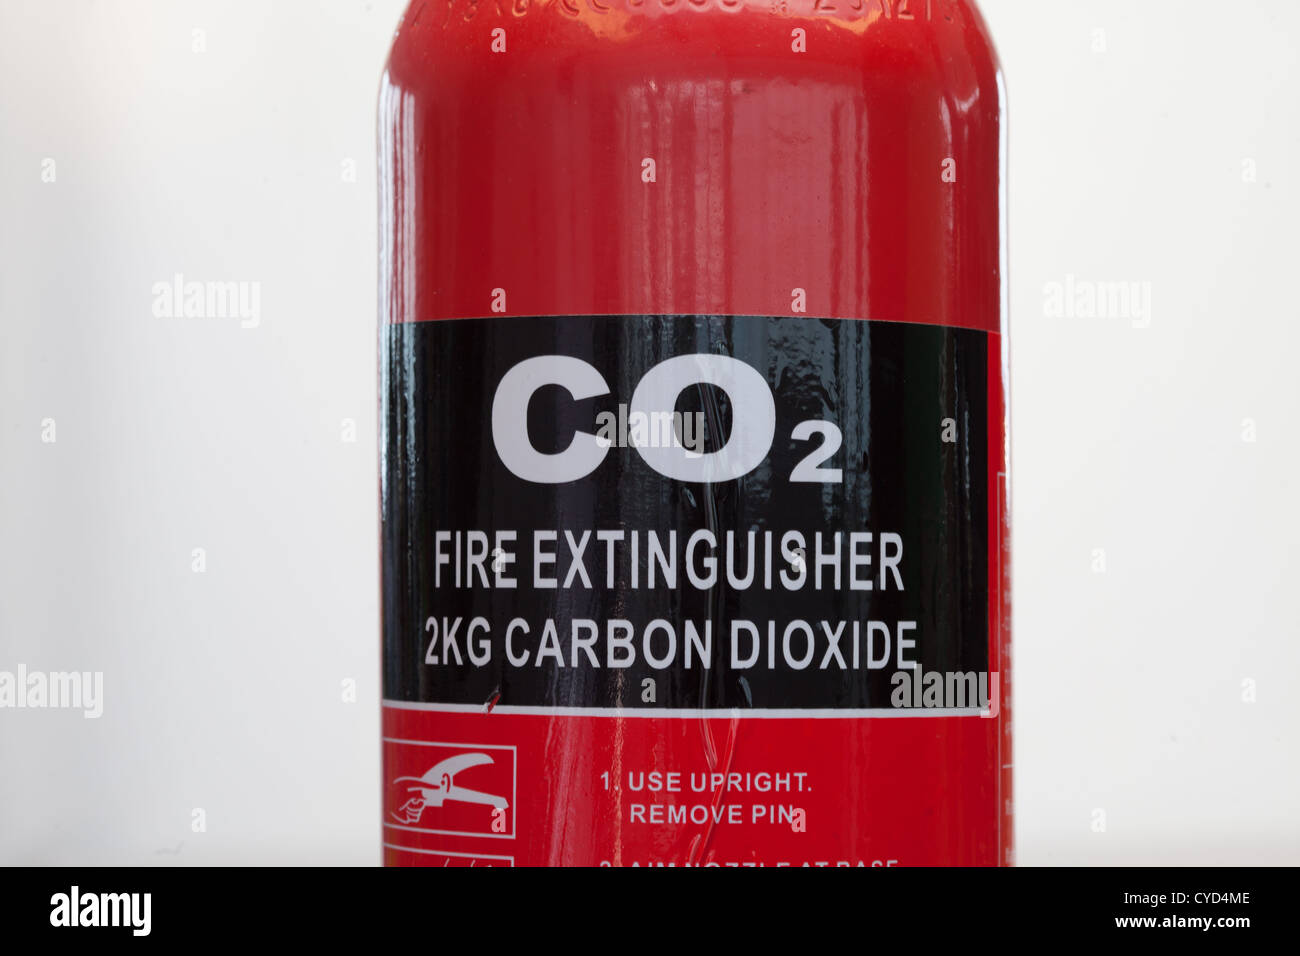 Carbon dioxide fire extinguisher close up Stock Photo